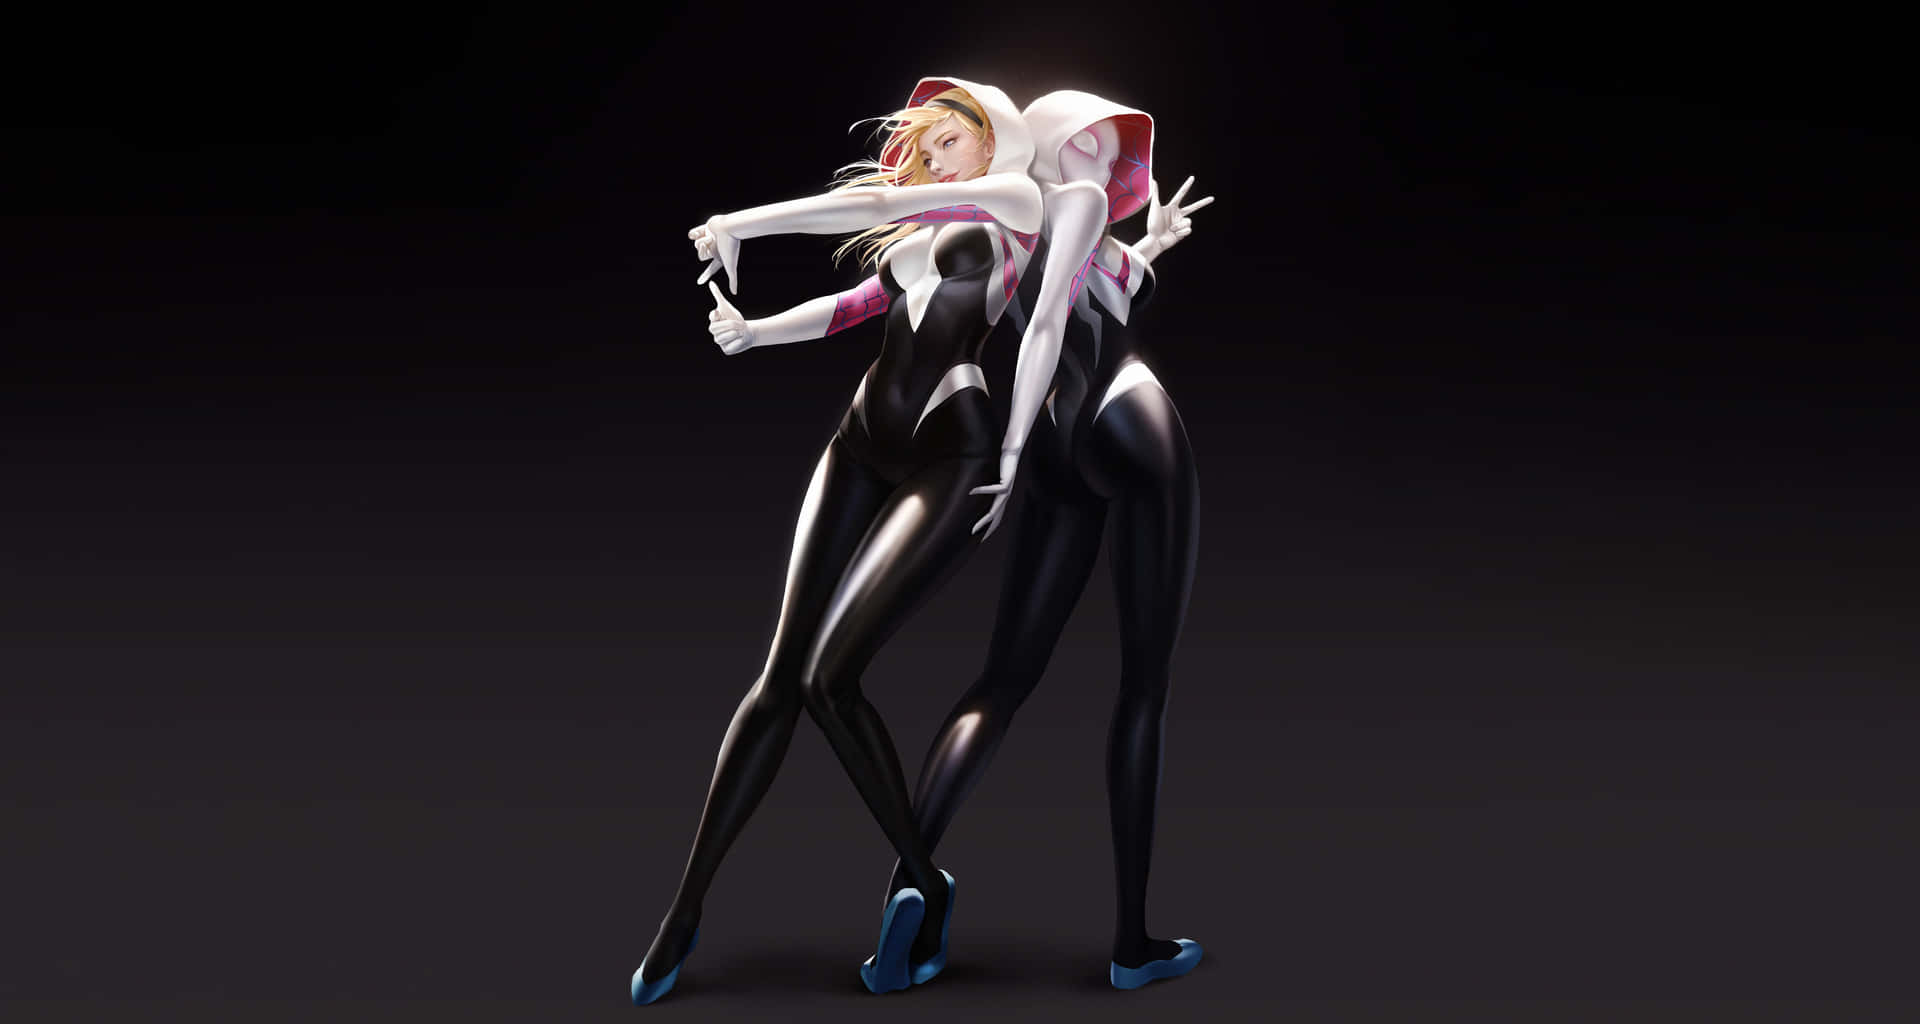 "Spider-Gwen swinging high, looking beautiful and powerful"